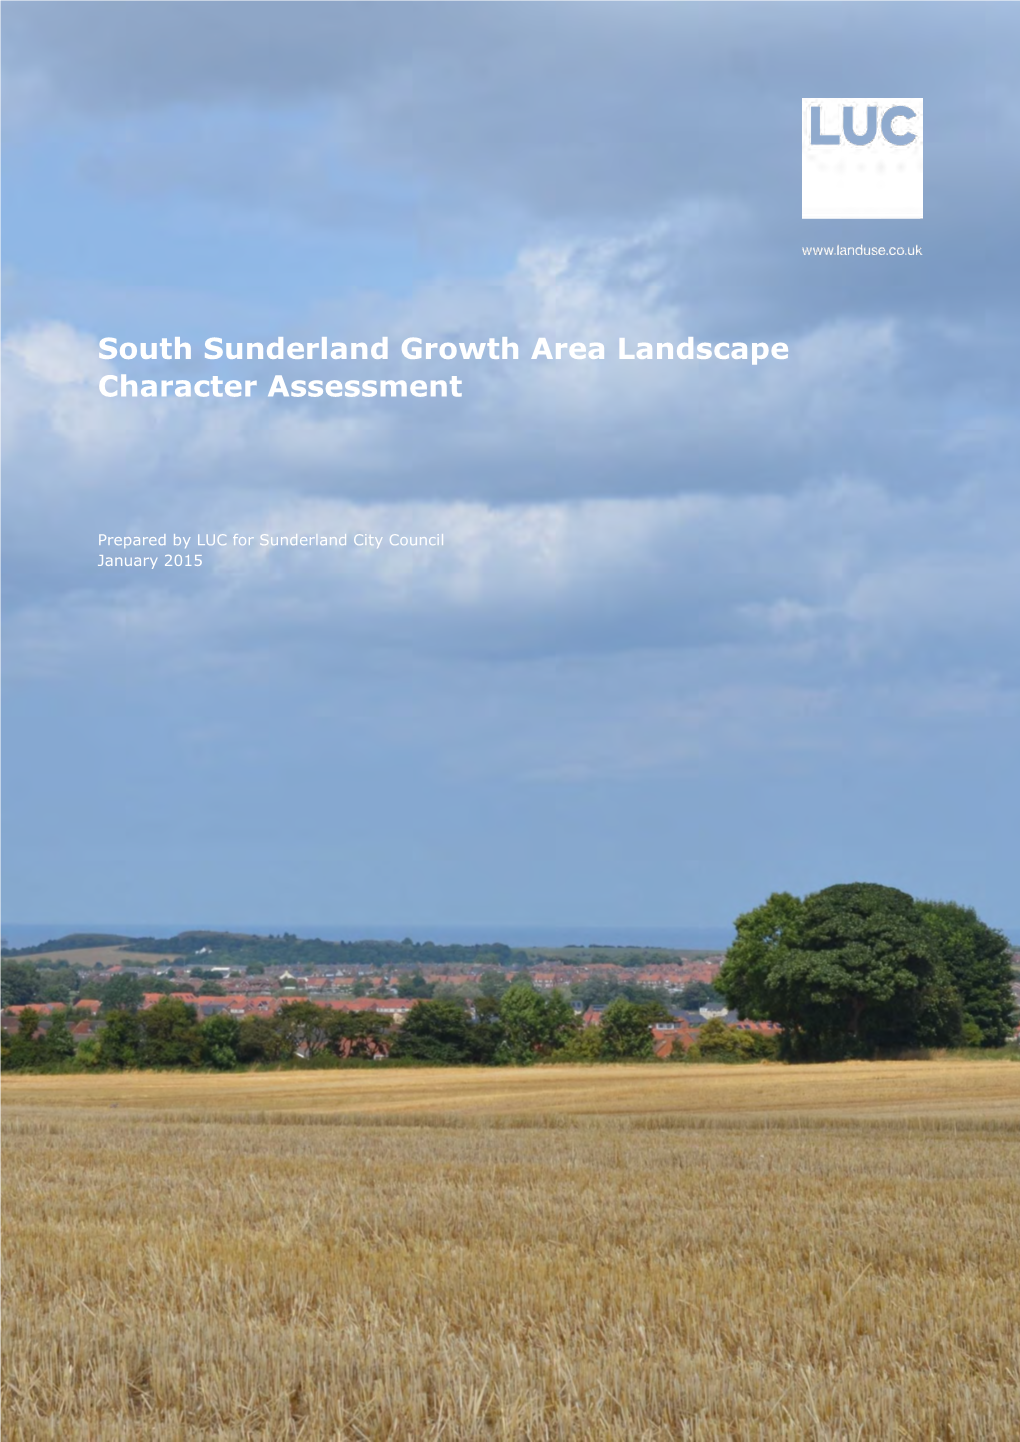 South Sunderland Growth Area Landscape Character Assessment